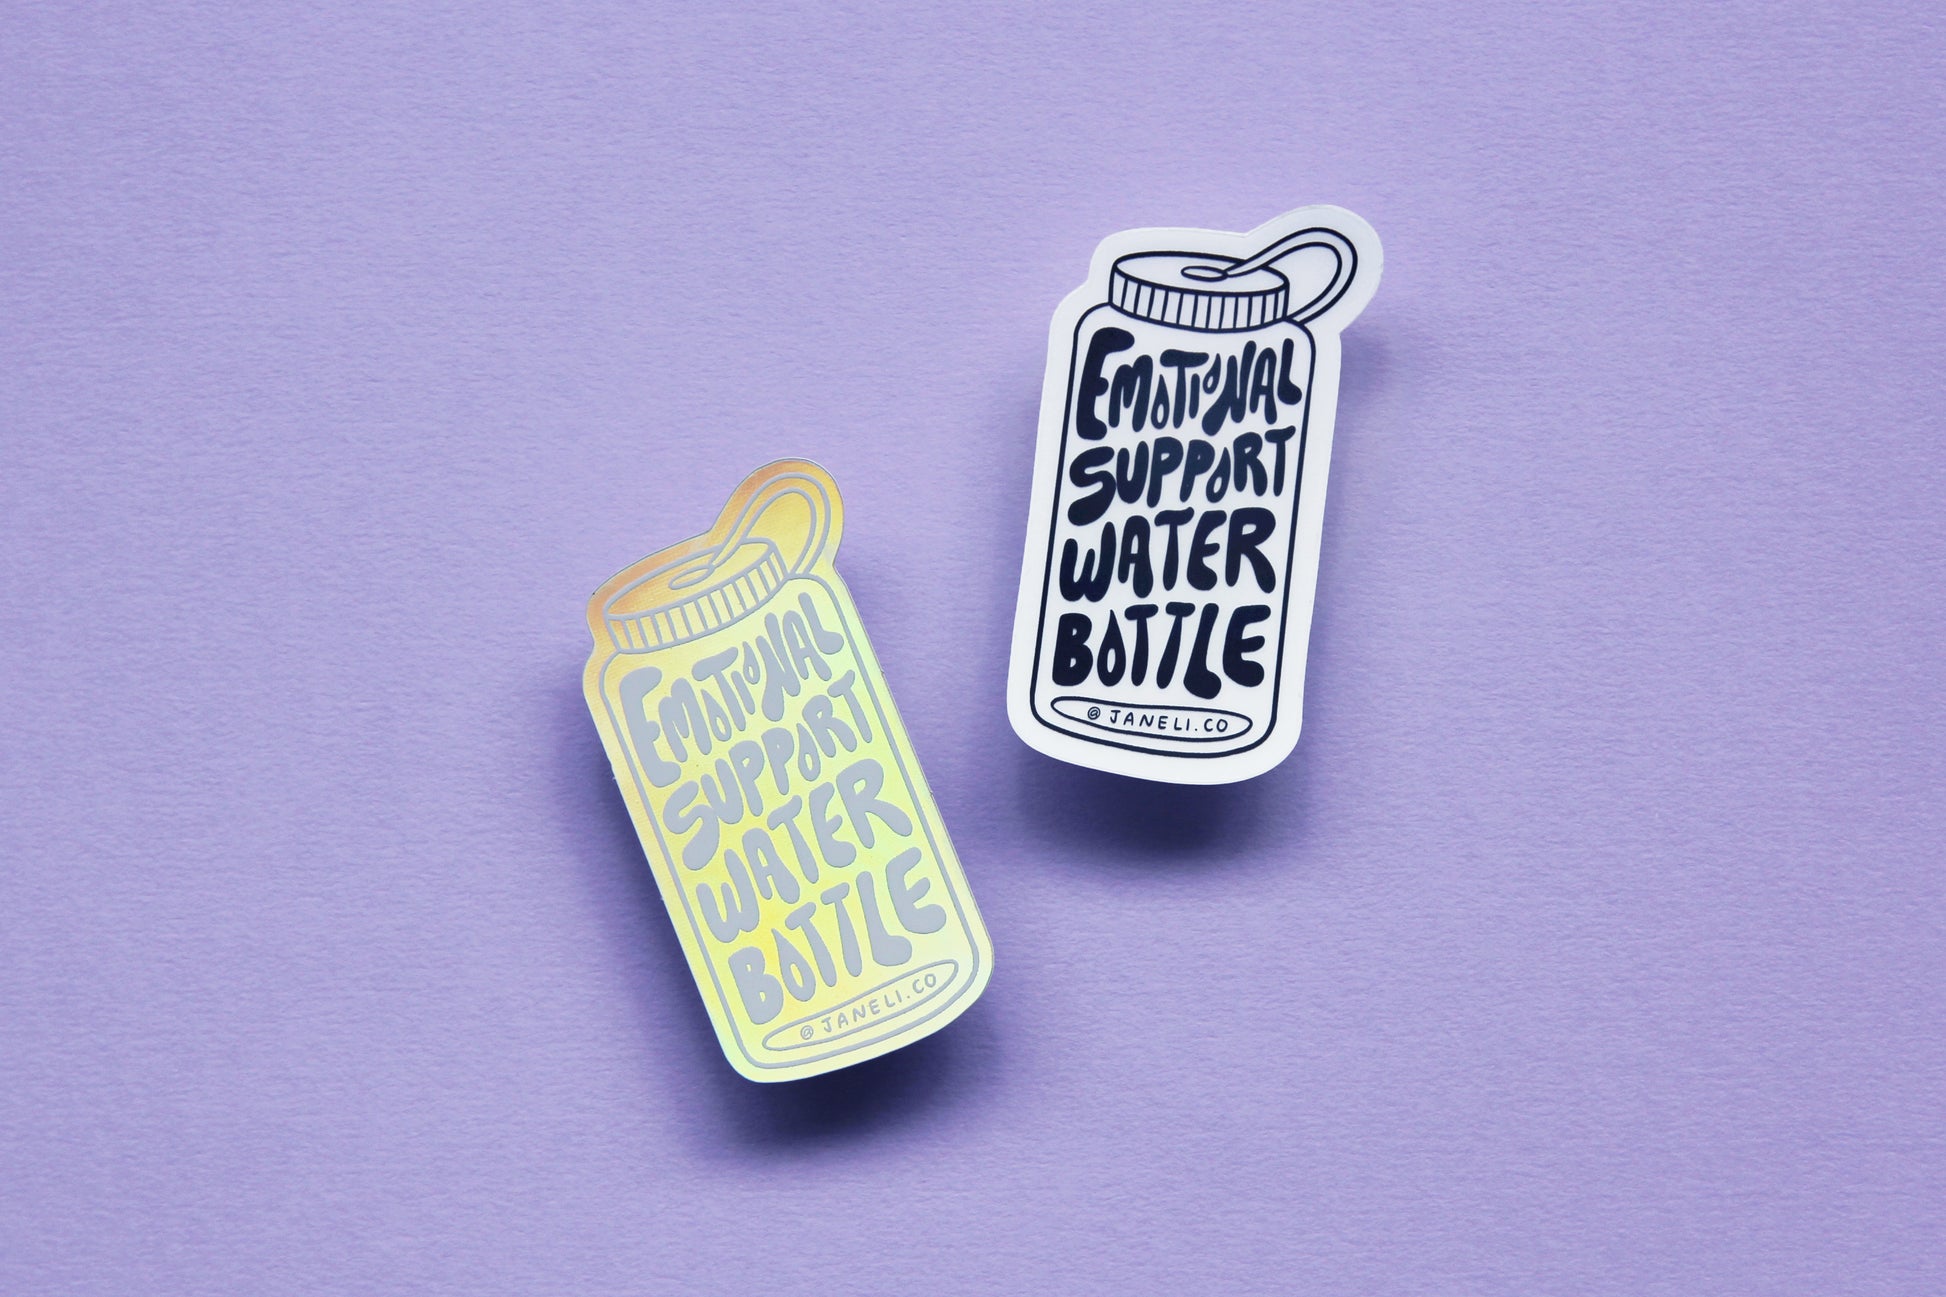 Two JaneLi.Co stickers that say "Emotional Support Water Bottle" in the shape of a water bottle over a lavender background. One sticker is black and white, and the other is holographic.